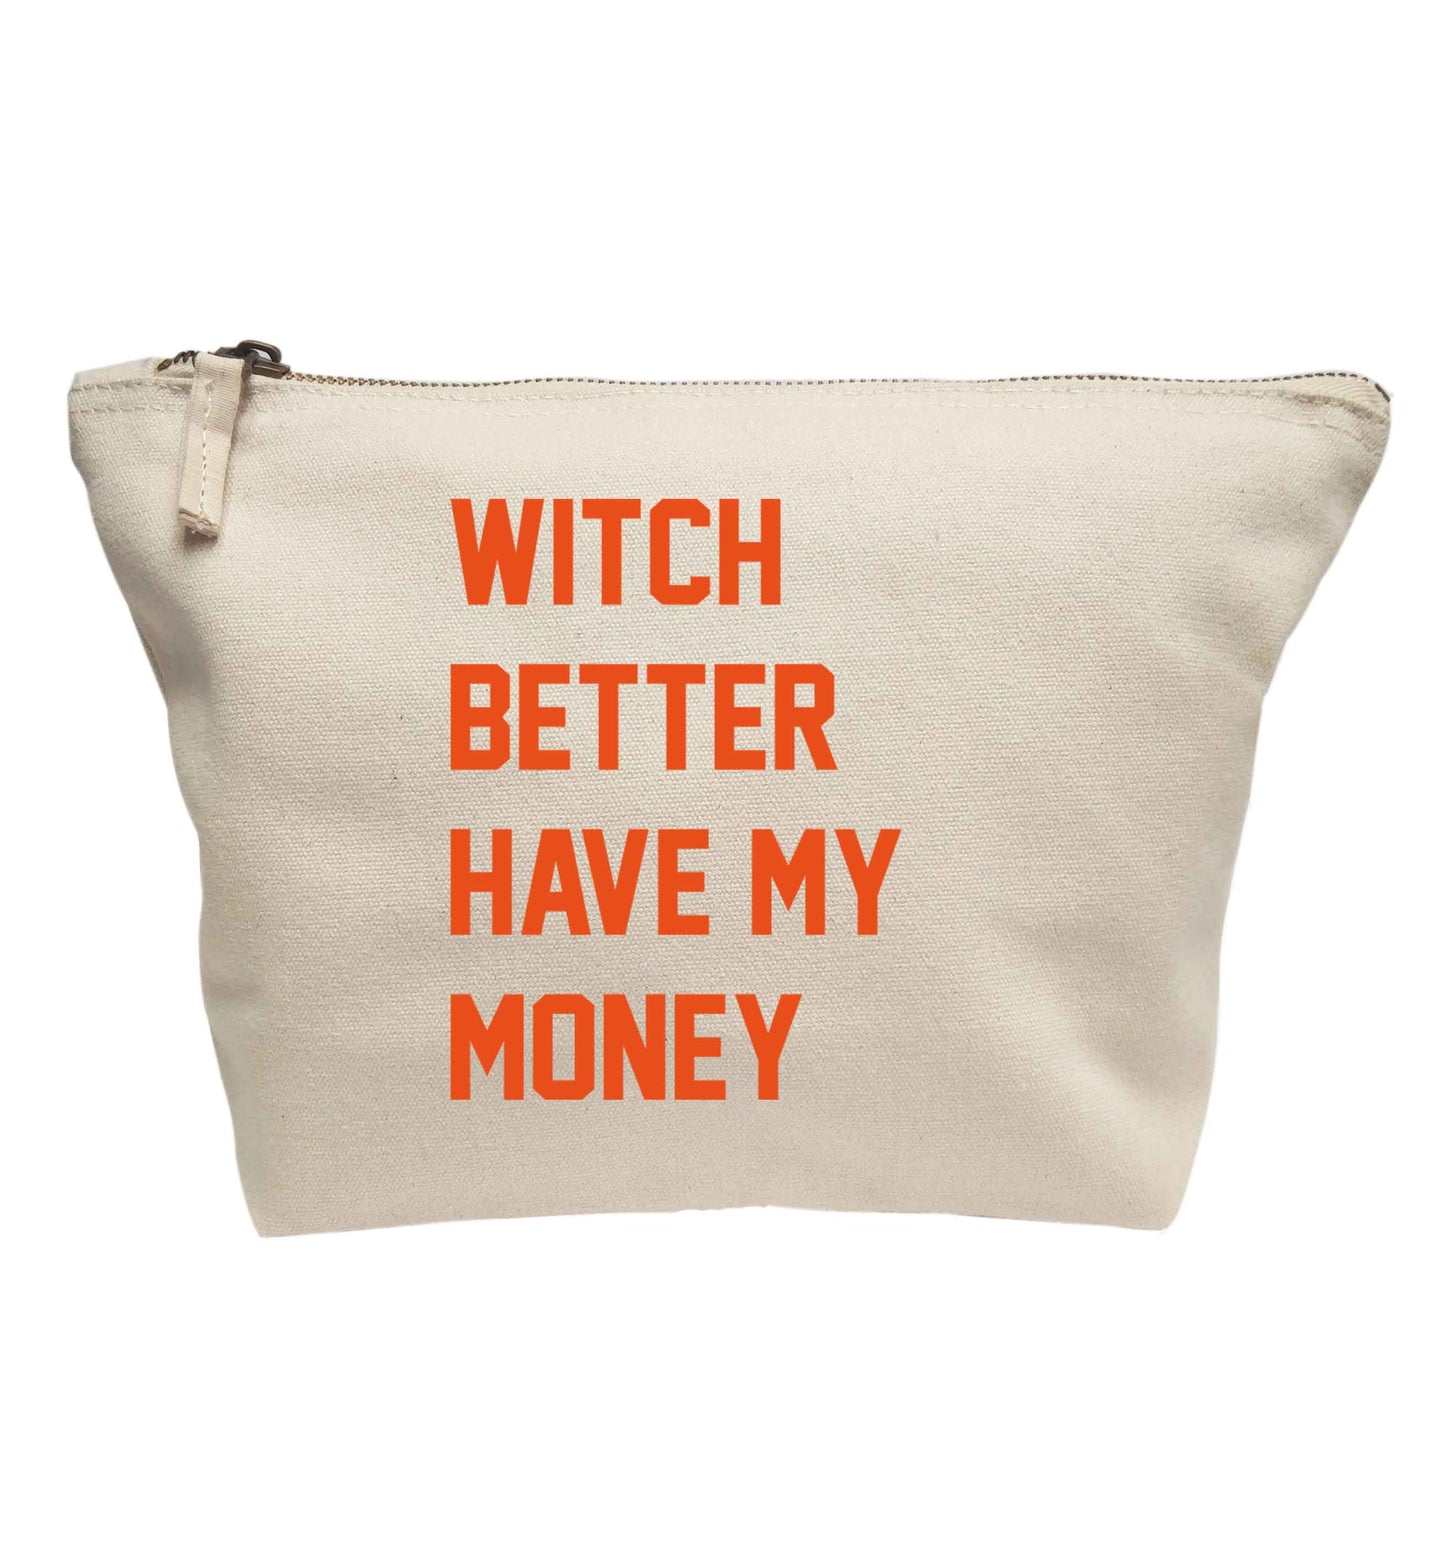 Witch better have my money | Makeup / wash bag